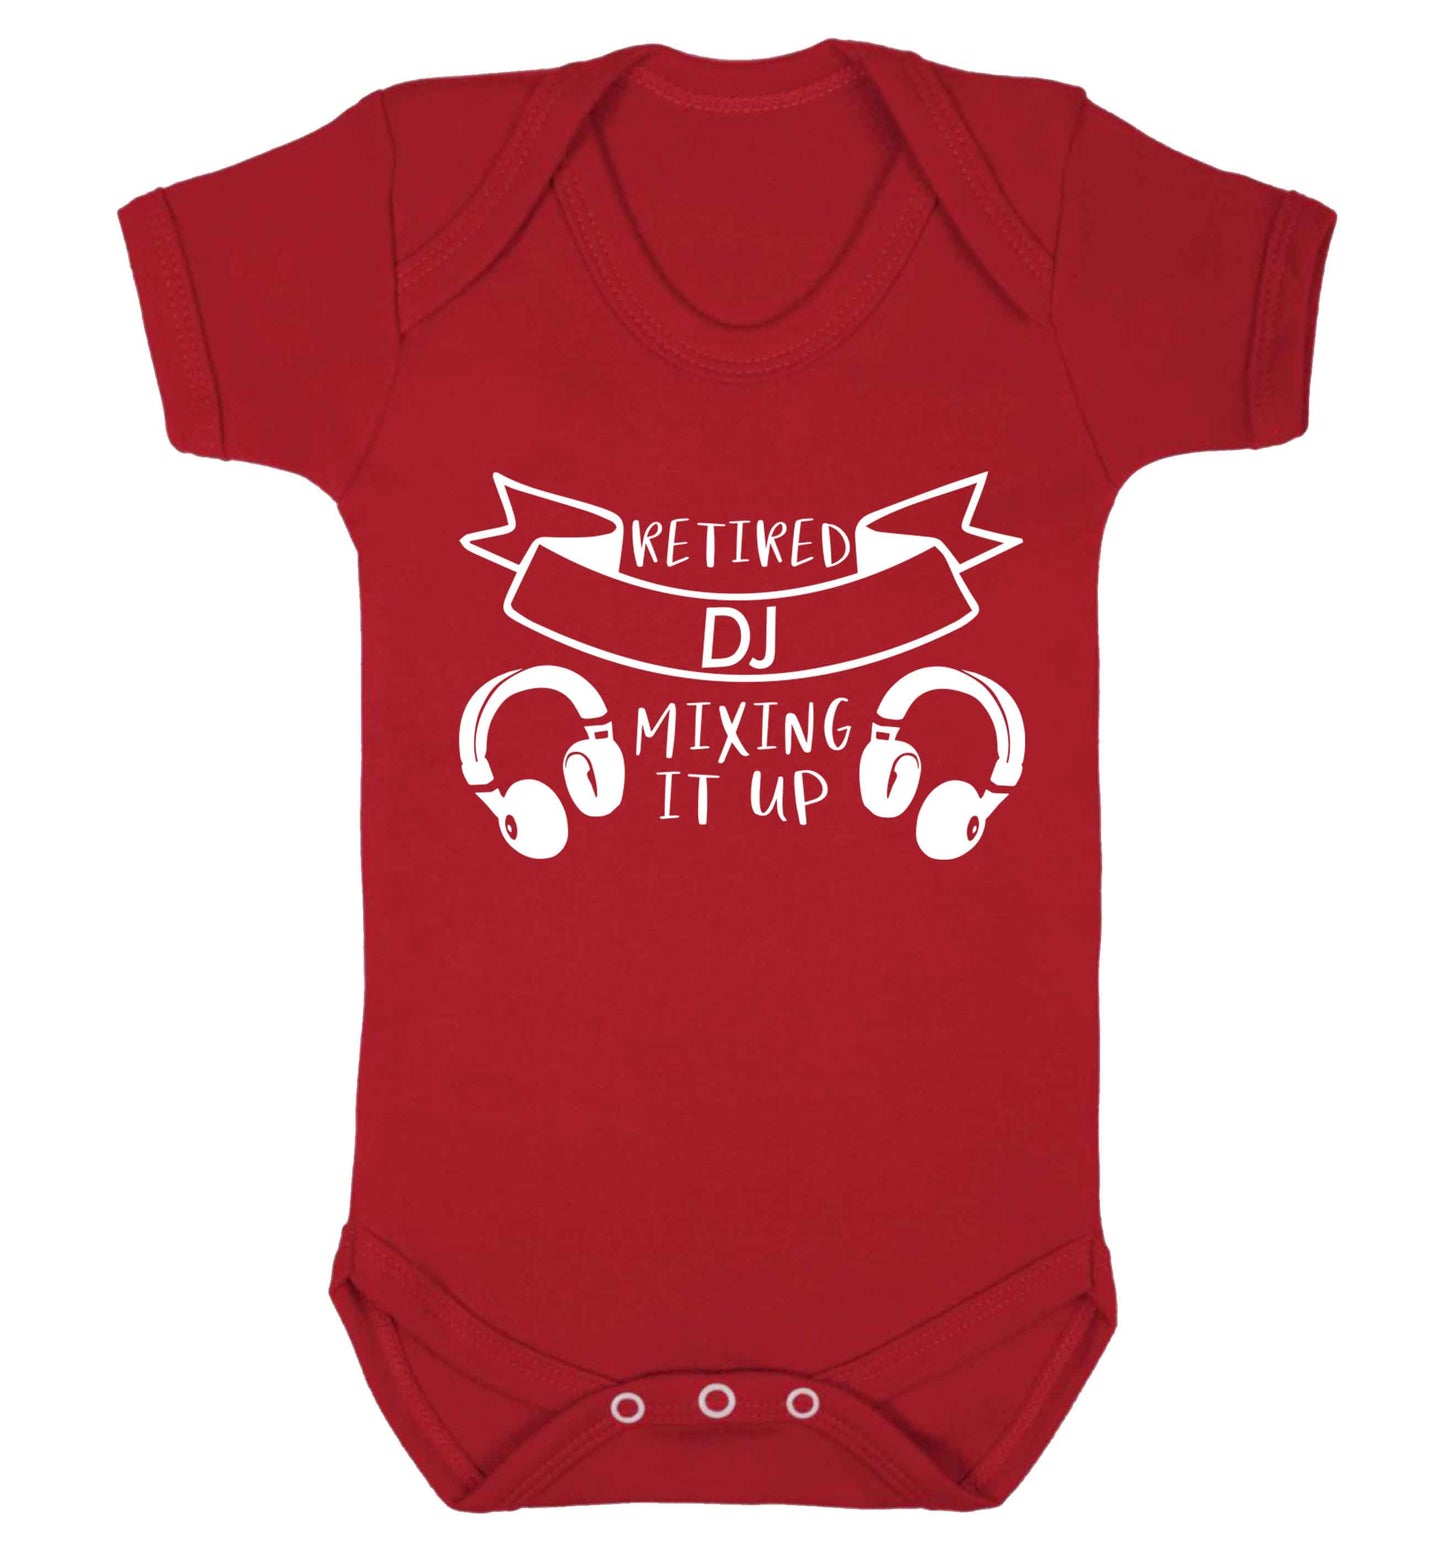 Retired DJ mixing it up Baby Vest red 18-24 months